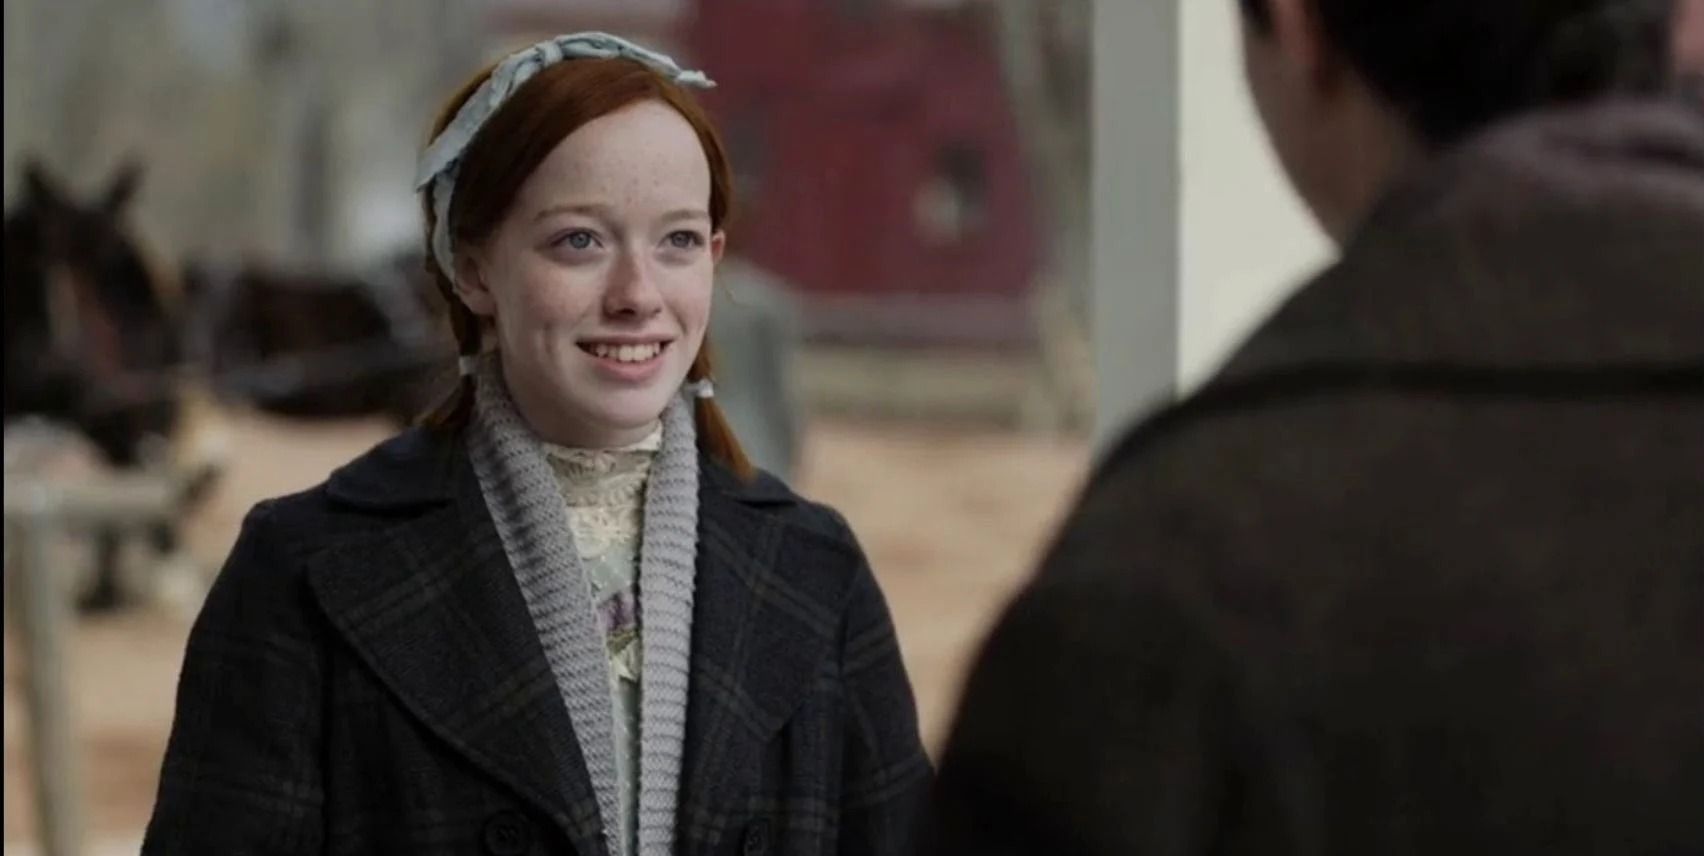 Anne smiling at Gilbert in Anne with an E